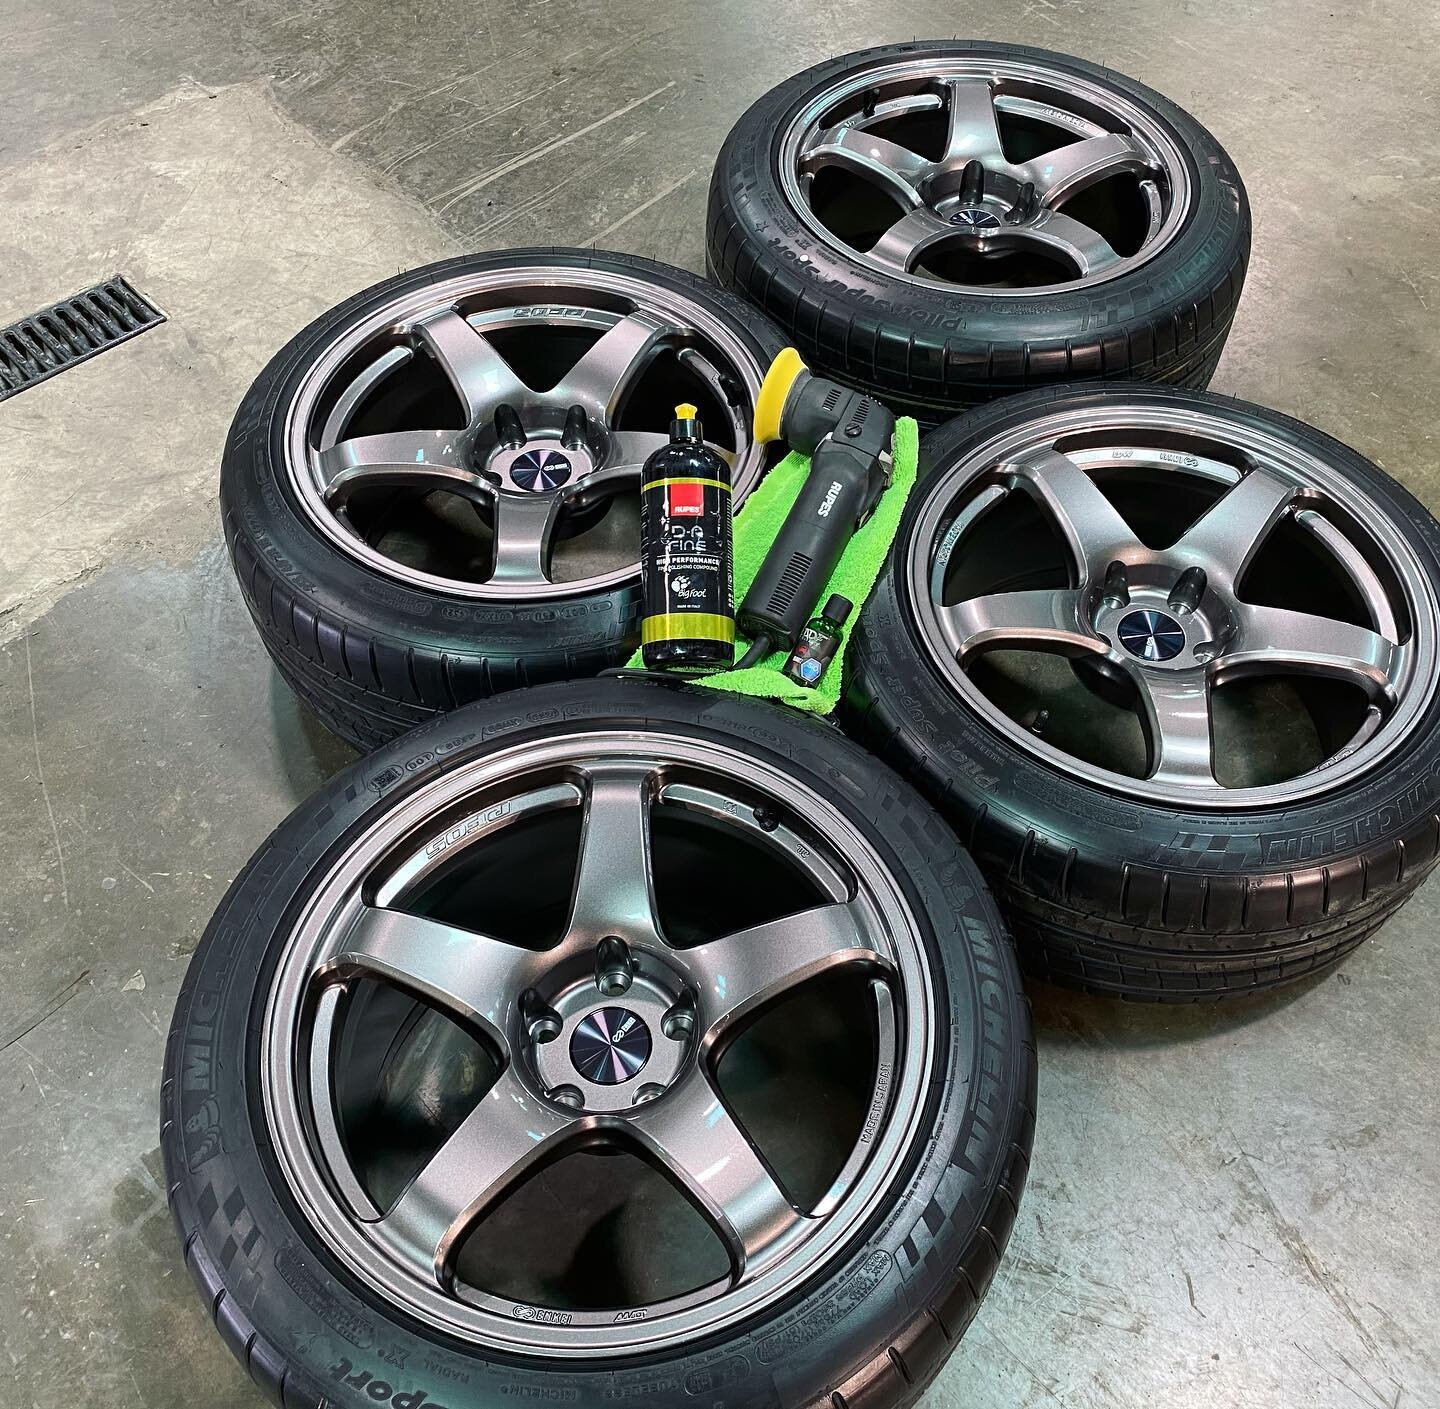 Did you know that we will ceramic coat your new wheels? These Enkeis came in for a full polish and a @jadeceramic #quartzpro 5 year coating. Even the newest finishes have untapped gloss that is begging to be uncovered! #pittsburghdetailing #ceramicco